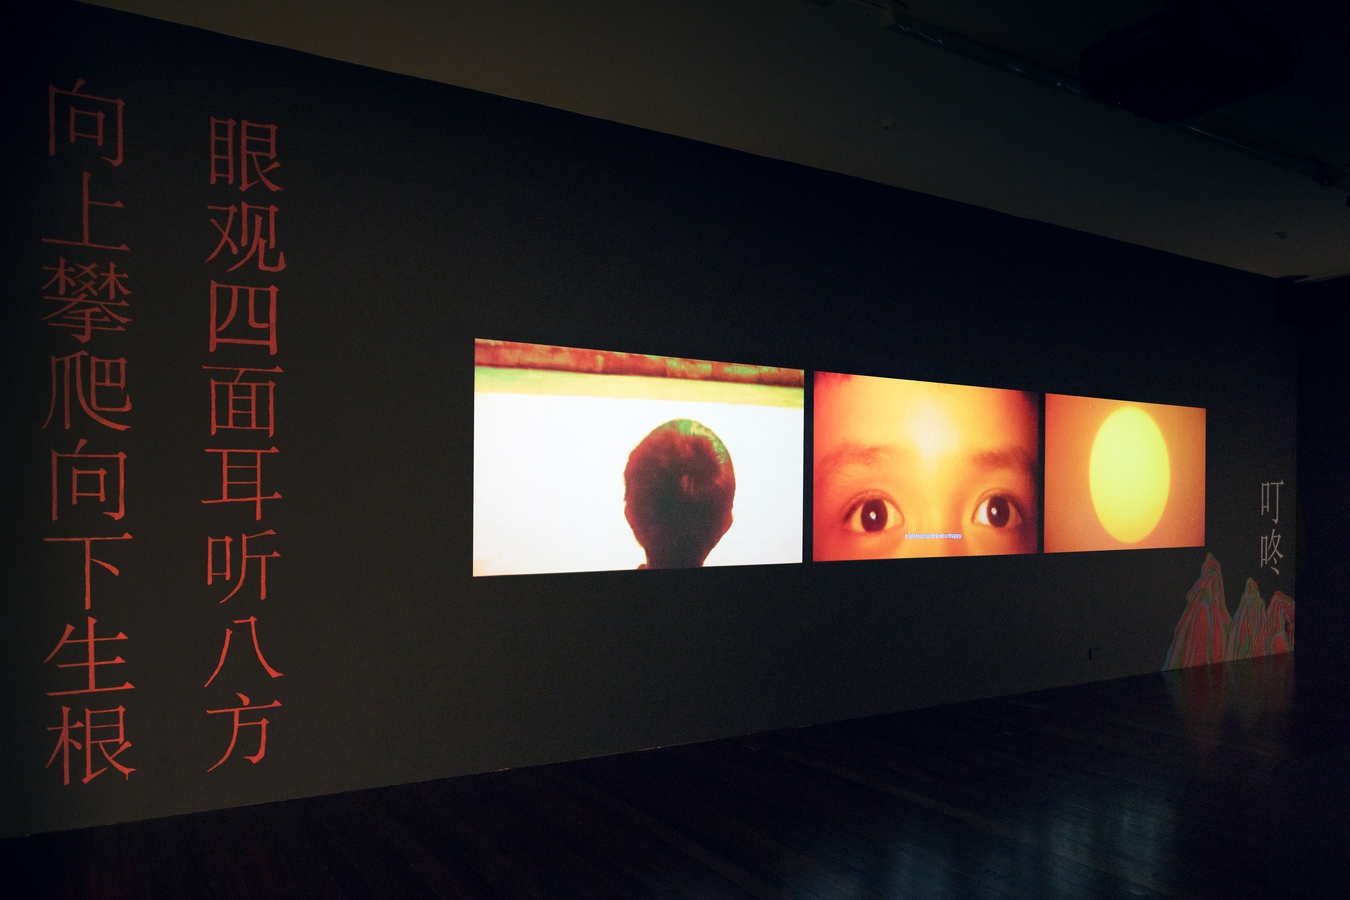 Image: Qianye Lin and Qianhe ‘AL’ Lin, Thus the Blast Carried It, Into the World 它便随着爆破, 冲向了世界 (installation view), 2021. Photo: Janneth Gil.